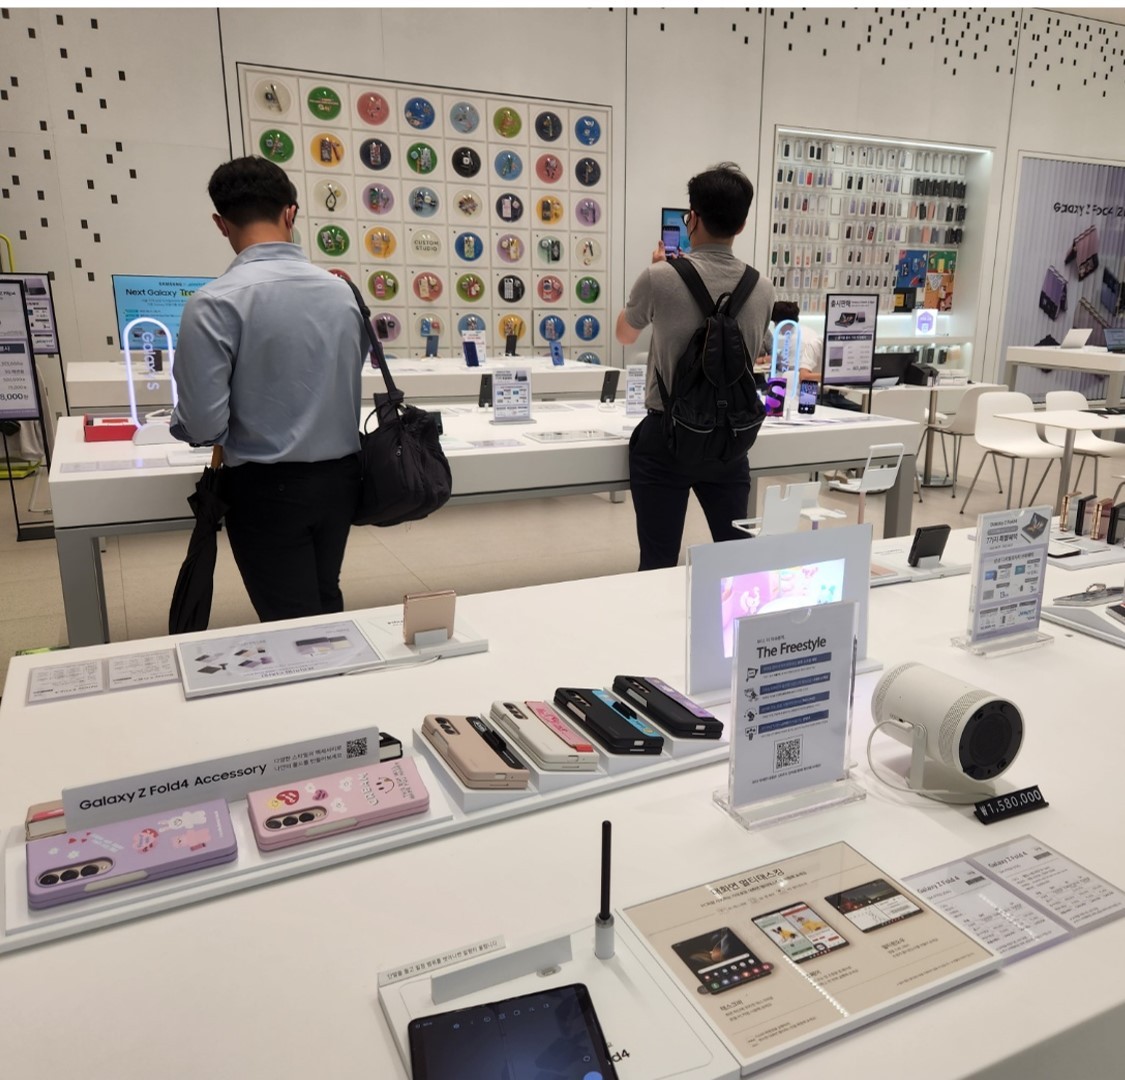 Customers check Samsung Electronics Co.‘s Galaxy smartphones displayed at a Samsung Digital Plaza outlet in Hongdae, western Seoul. (Choi Jae-hee / The Korea Herald)